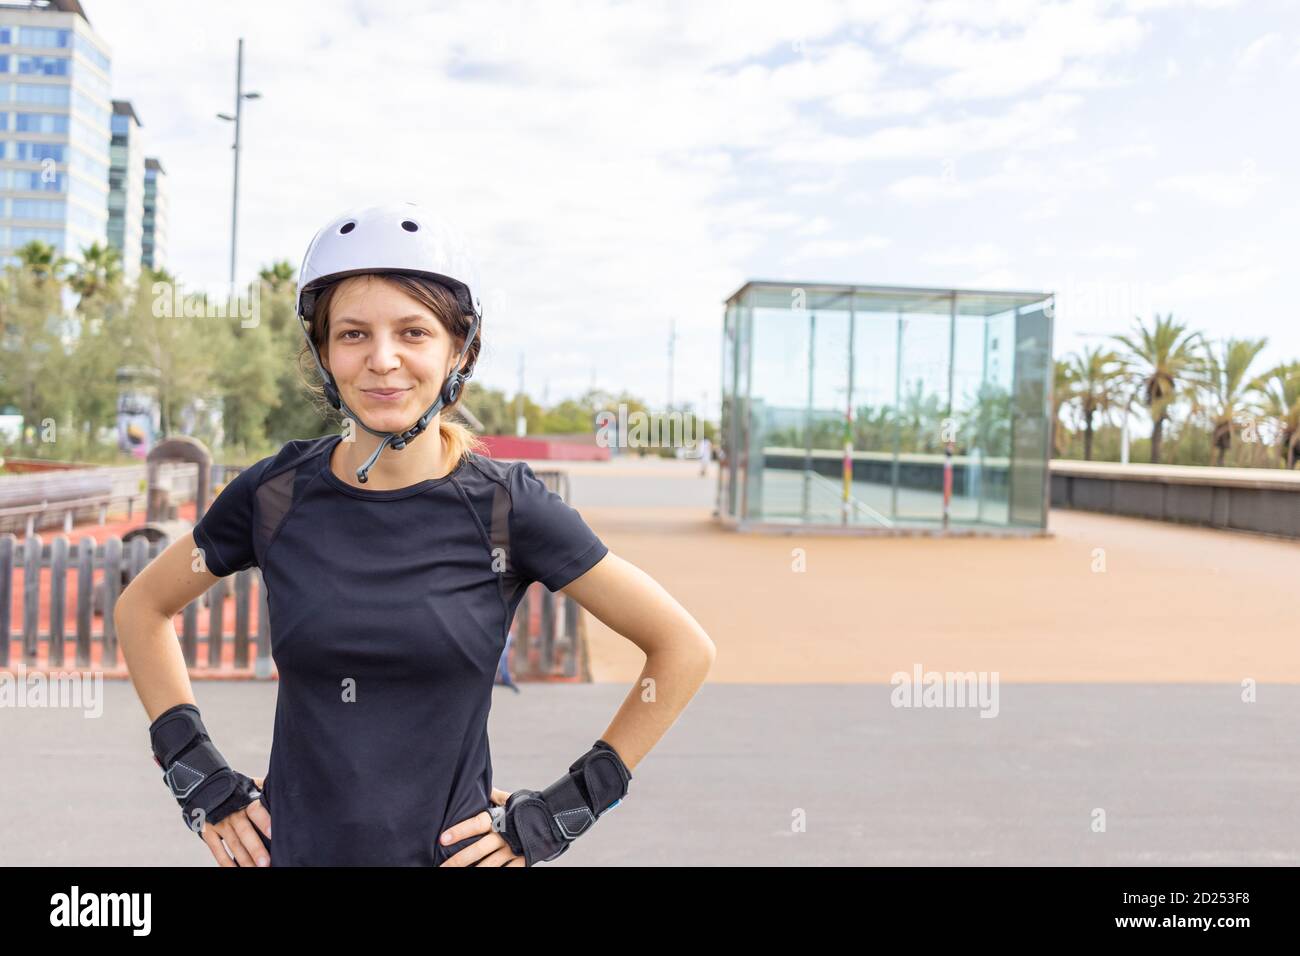 Young happy roller skater caucasian woman in the white helmet and black sporty clothes on a sunny day in the skatepark, urban environment Stock Photo